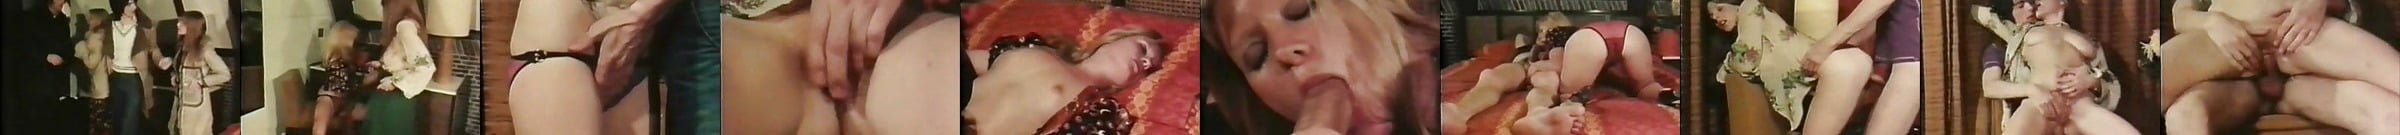 Mary Millington In Special Assignment Porn 1f Xhamster Xhamster